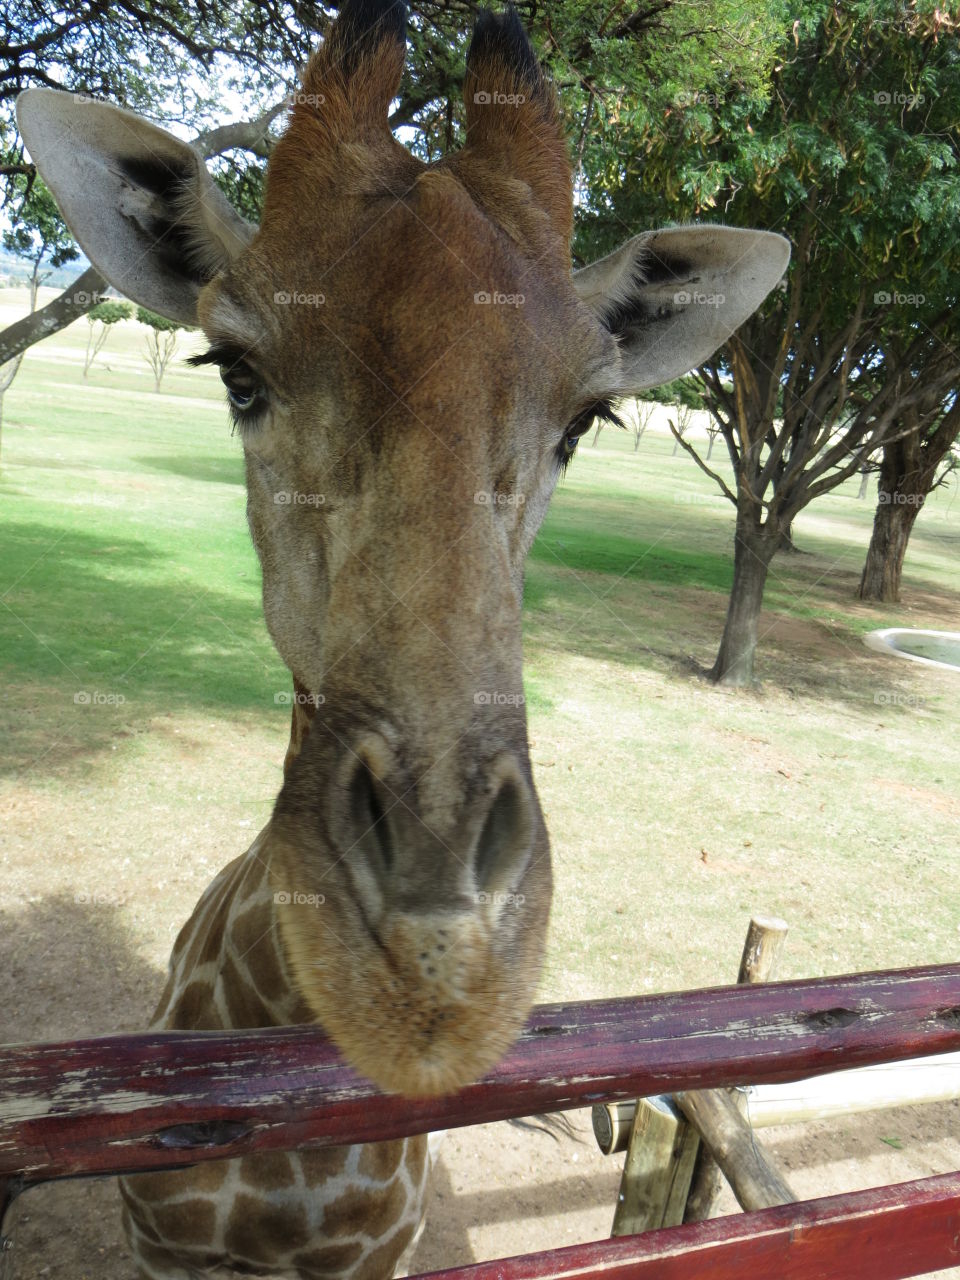 Giraffe being friendly and saying hello 